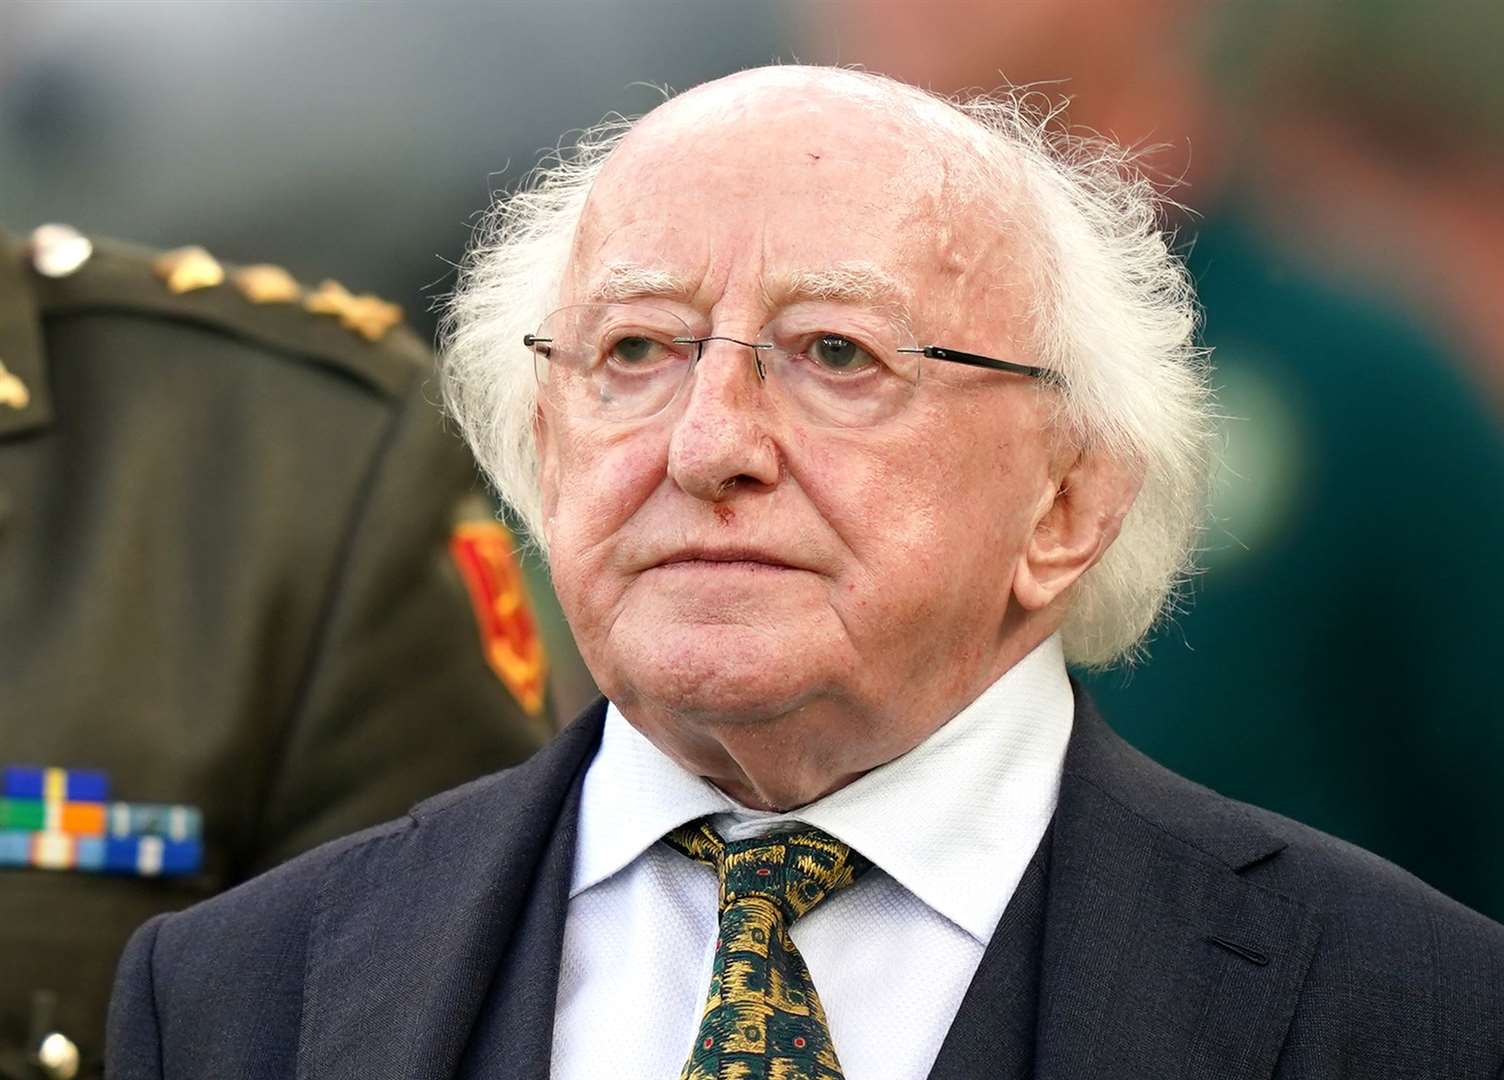 President of Ireland Michael D Higgins is expected to attend the funeral of Shane MacGowan in Co Tipperary (Brian Lawless/PA)